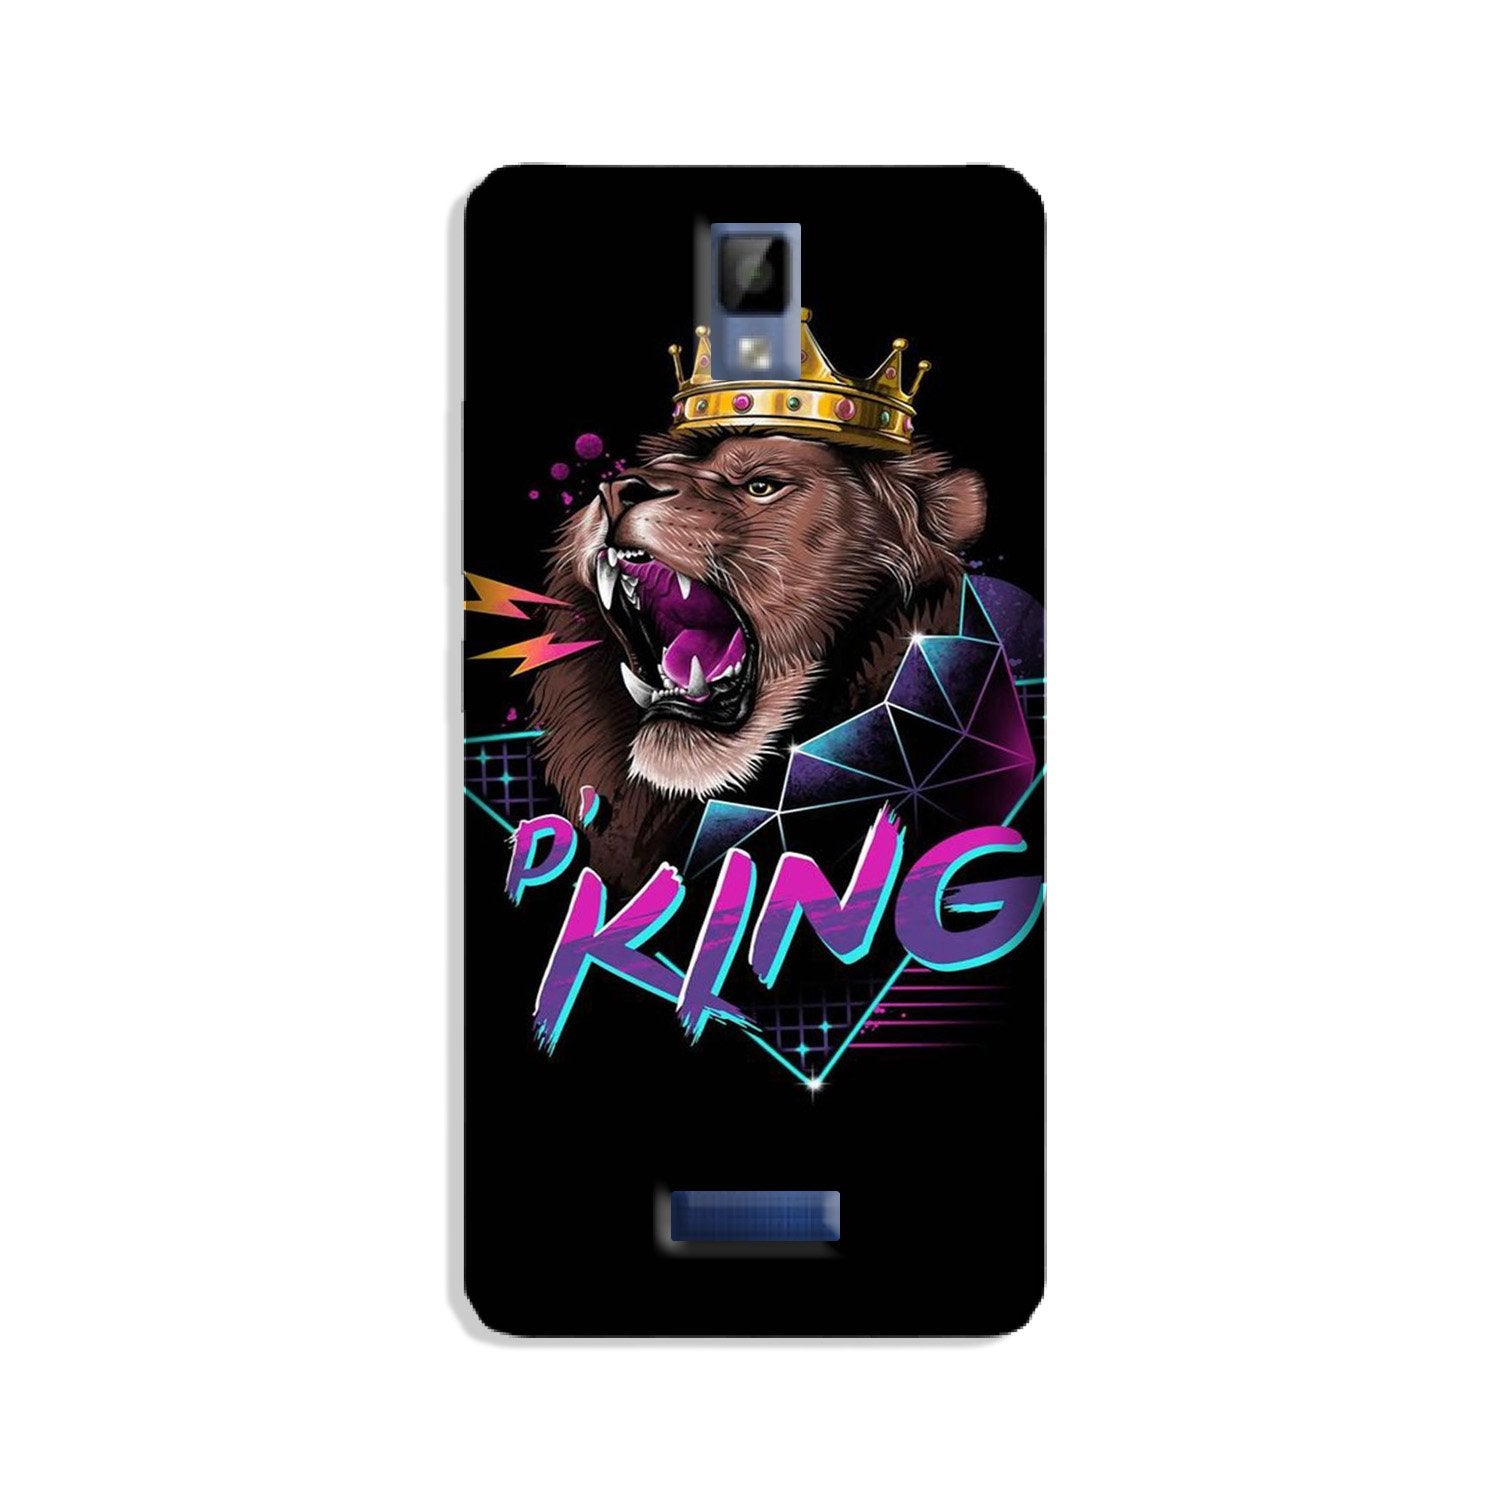 Lion King Case for Gionee P7 (Design No. 219)